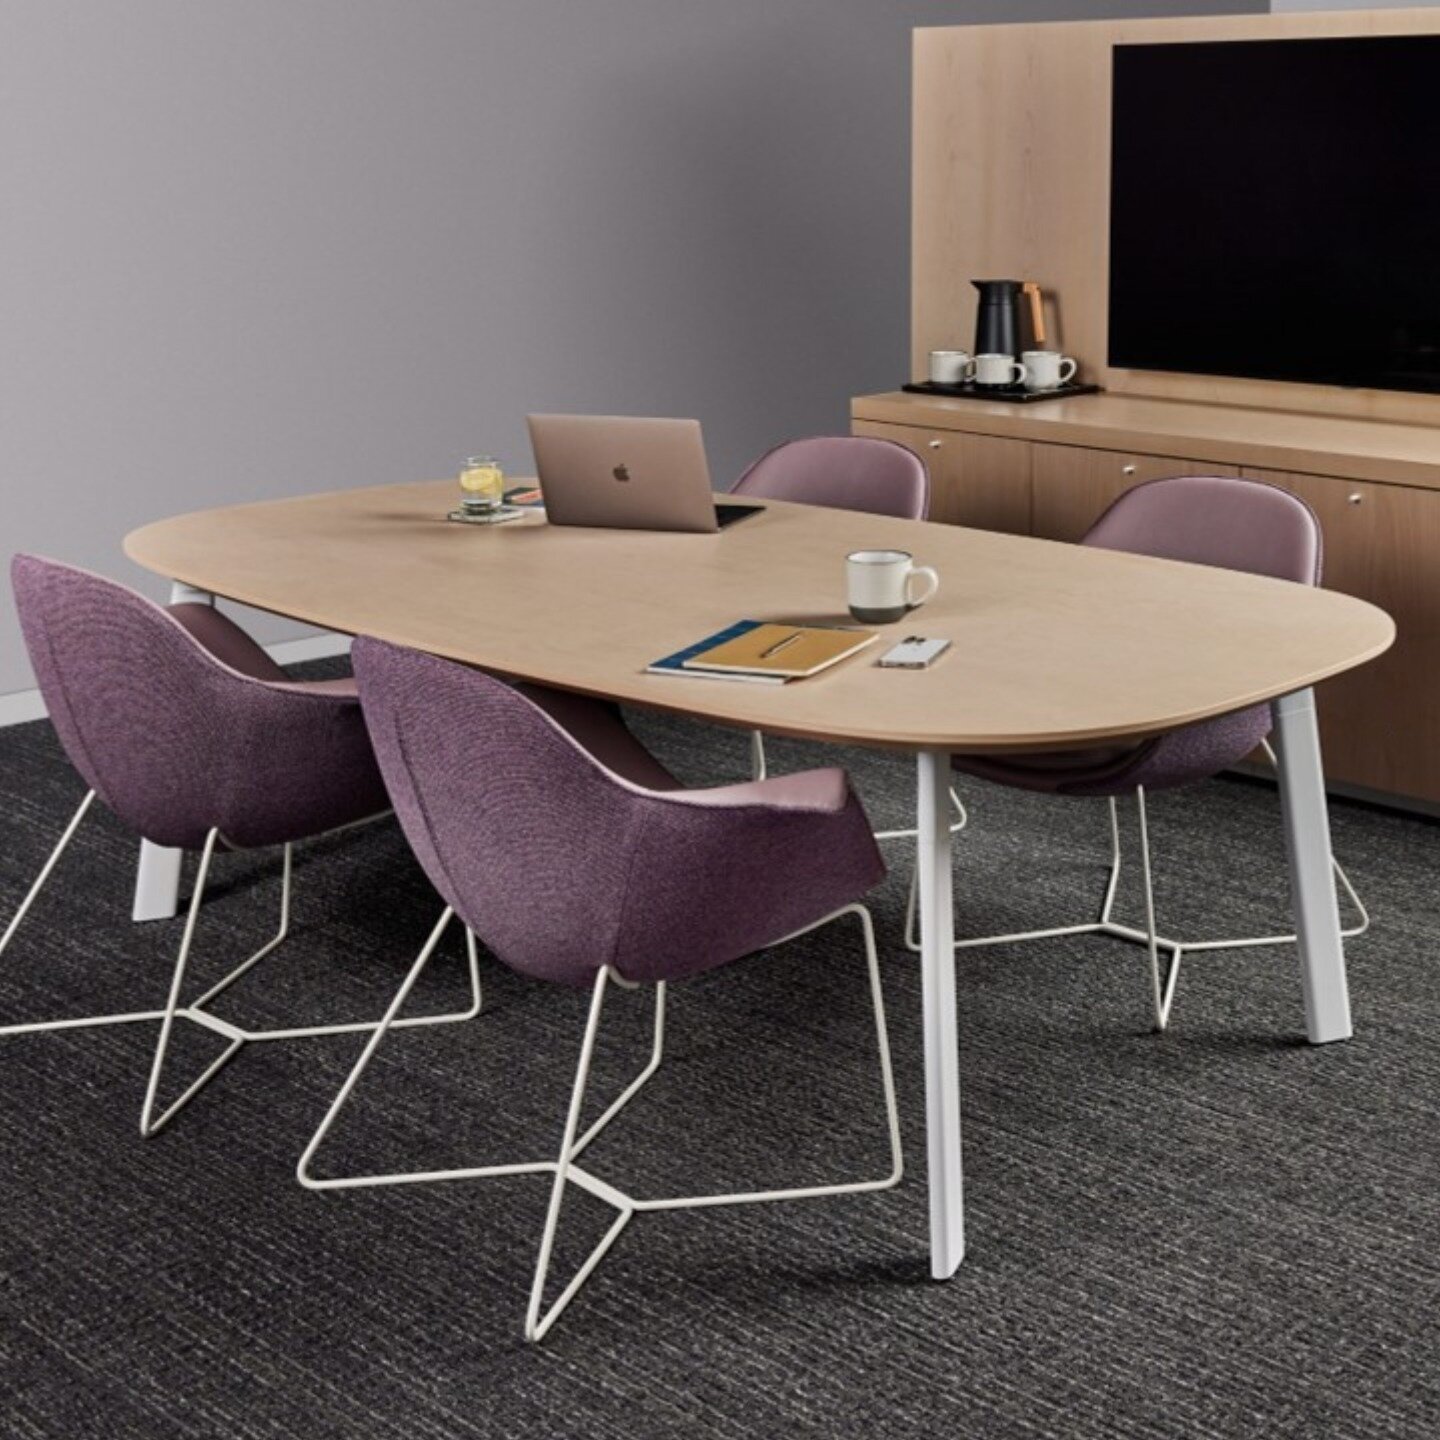 Looking for a light, elegant conference room solution? Check out Rhoi + Pleat by @tuohyfurniture. Fresh, elegant, made in MN. 🖤
.
.
.
.
.
#TuohyFurniture #ContractFurniture #TuohyRhoi #TuohyPleat #OfficeDesign #MadeInMN #InteriorDesignInspo #Interio